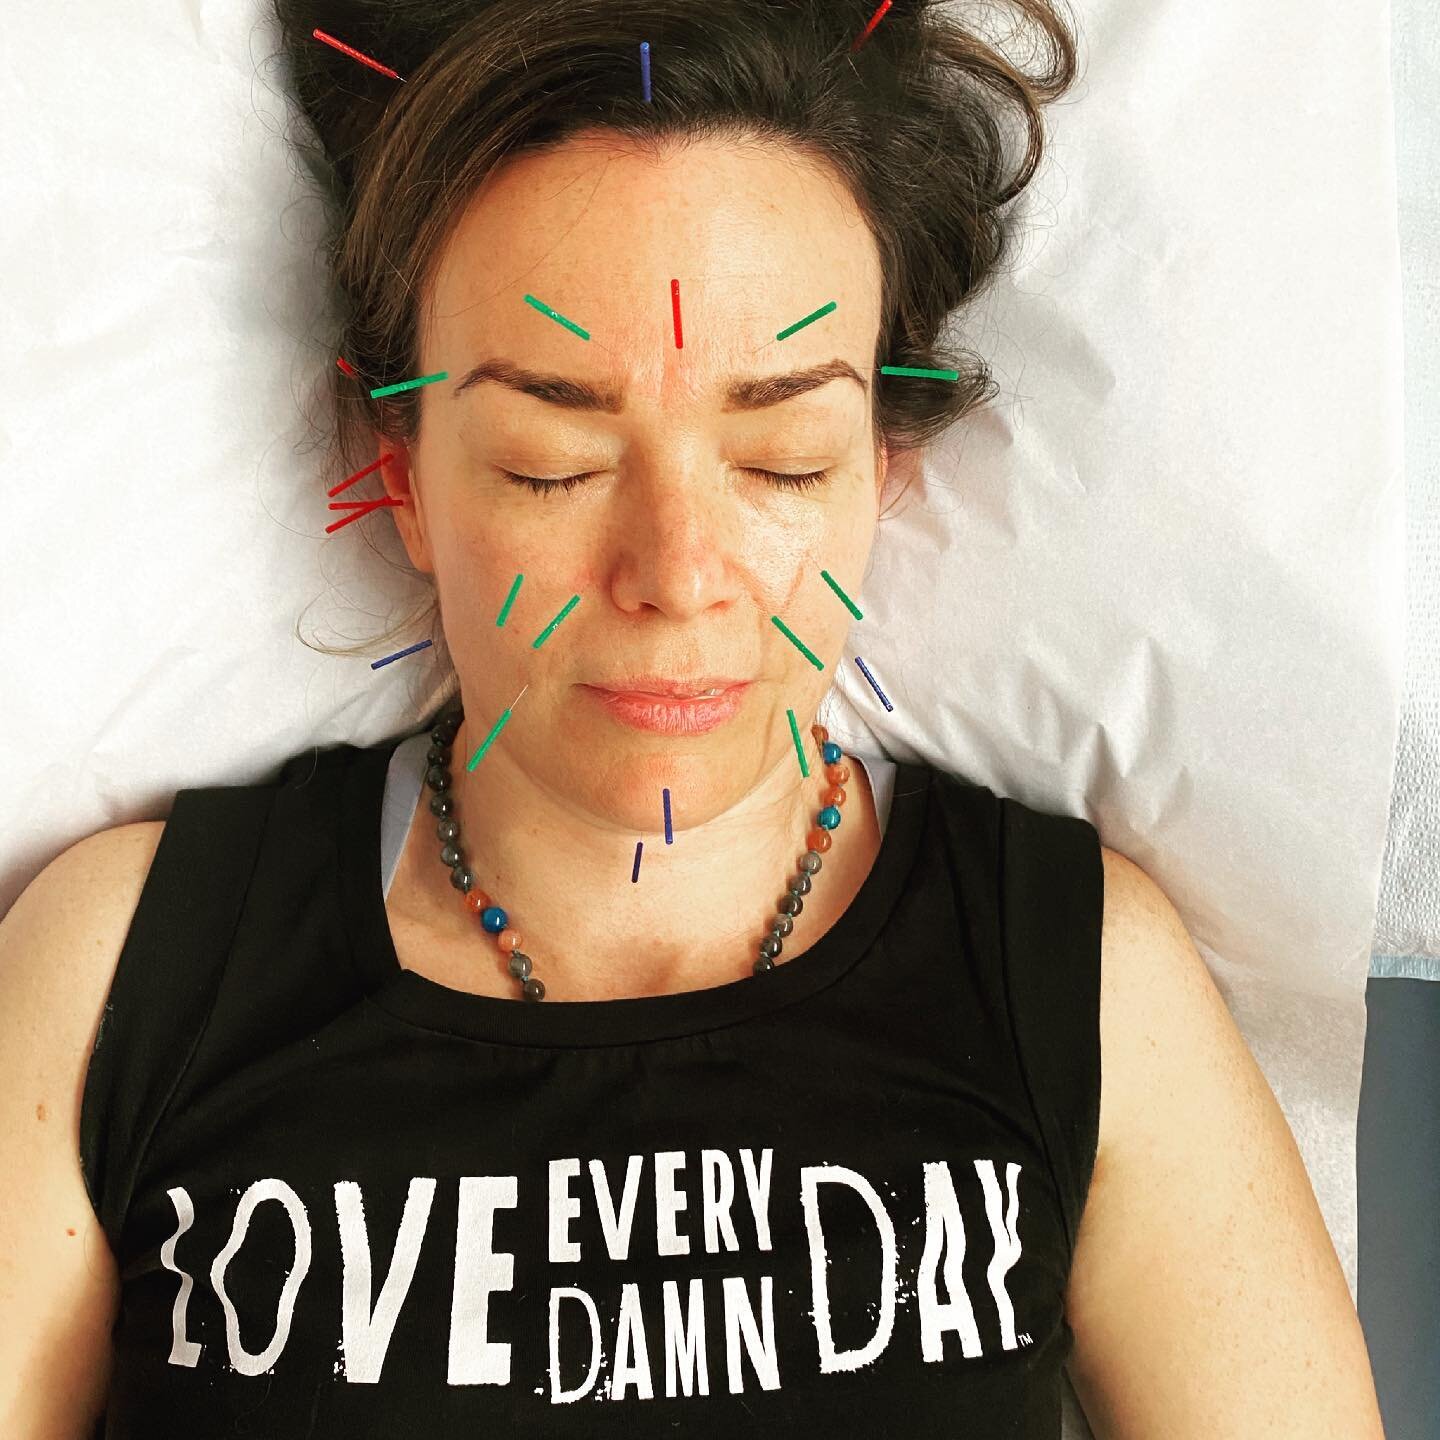 💕Love Every Damn Day.

💕And don&rsquo;t forget to love yourself first. Even if it means getting needles stuck in your face. 🤪

💕I promise it doesn&rsquo;t hurt. And leaves you glowing, inside and out. 

💕Remember to receive, especially if you&rs